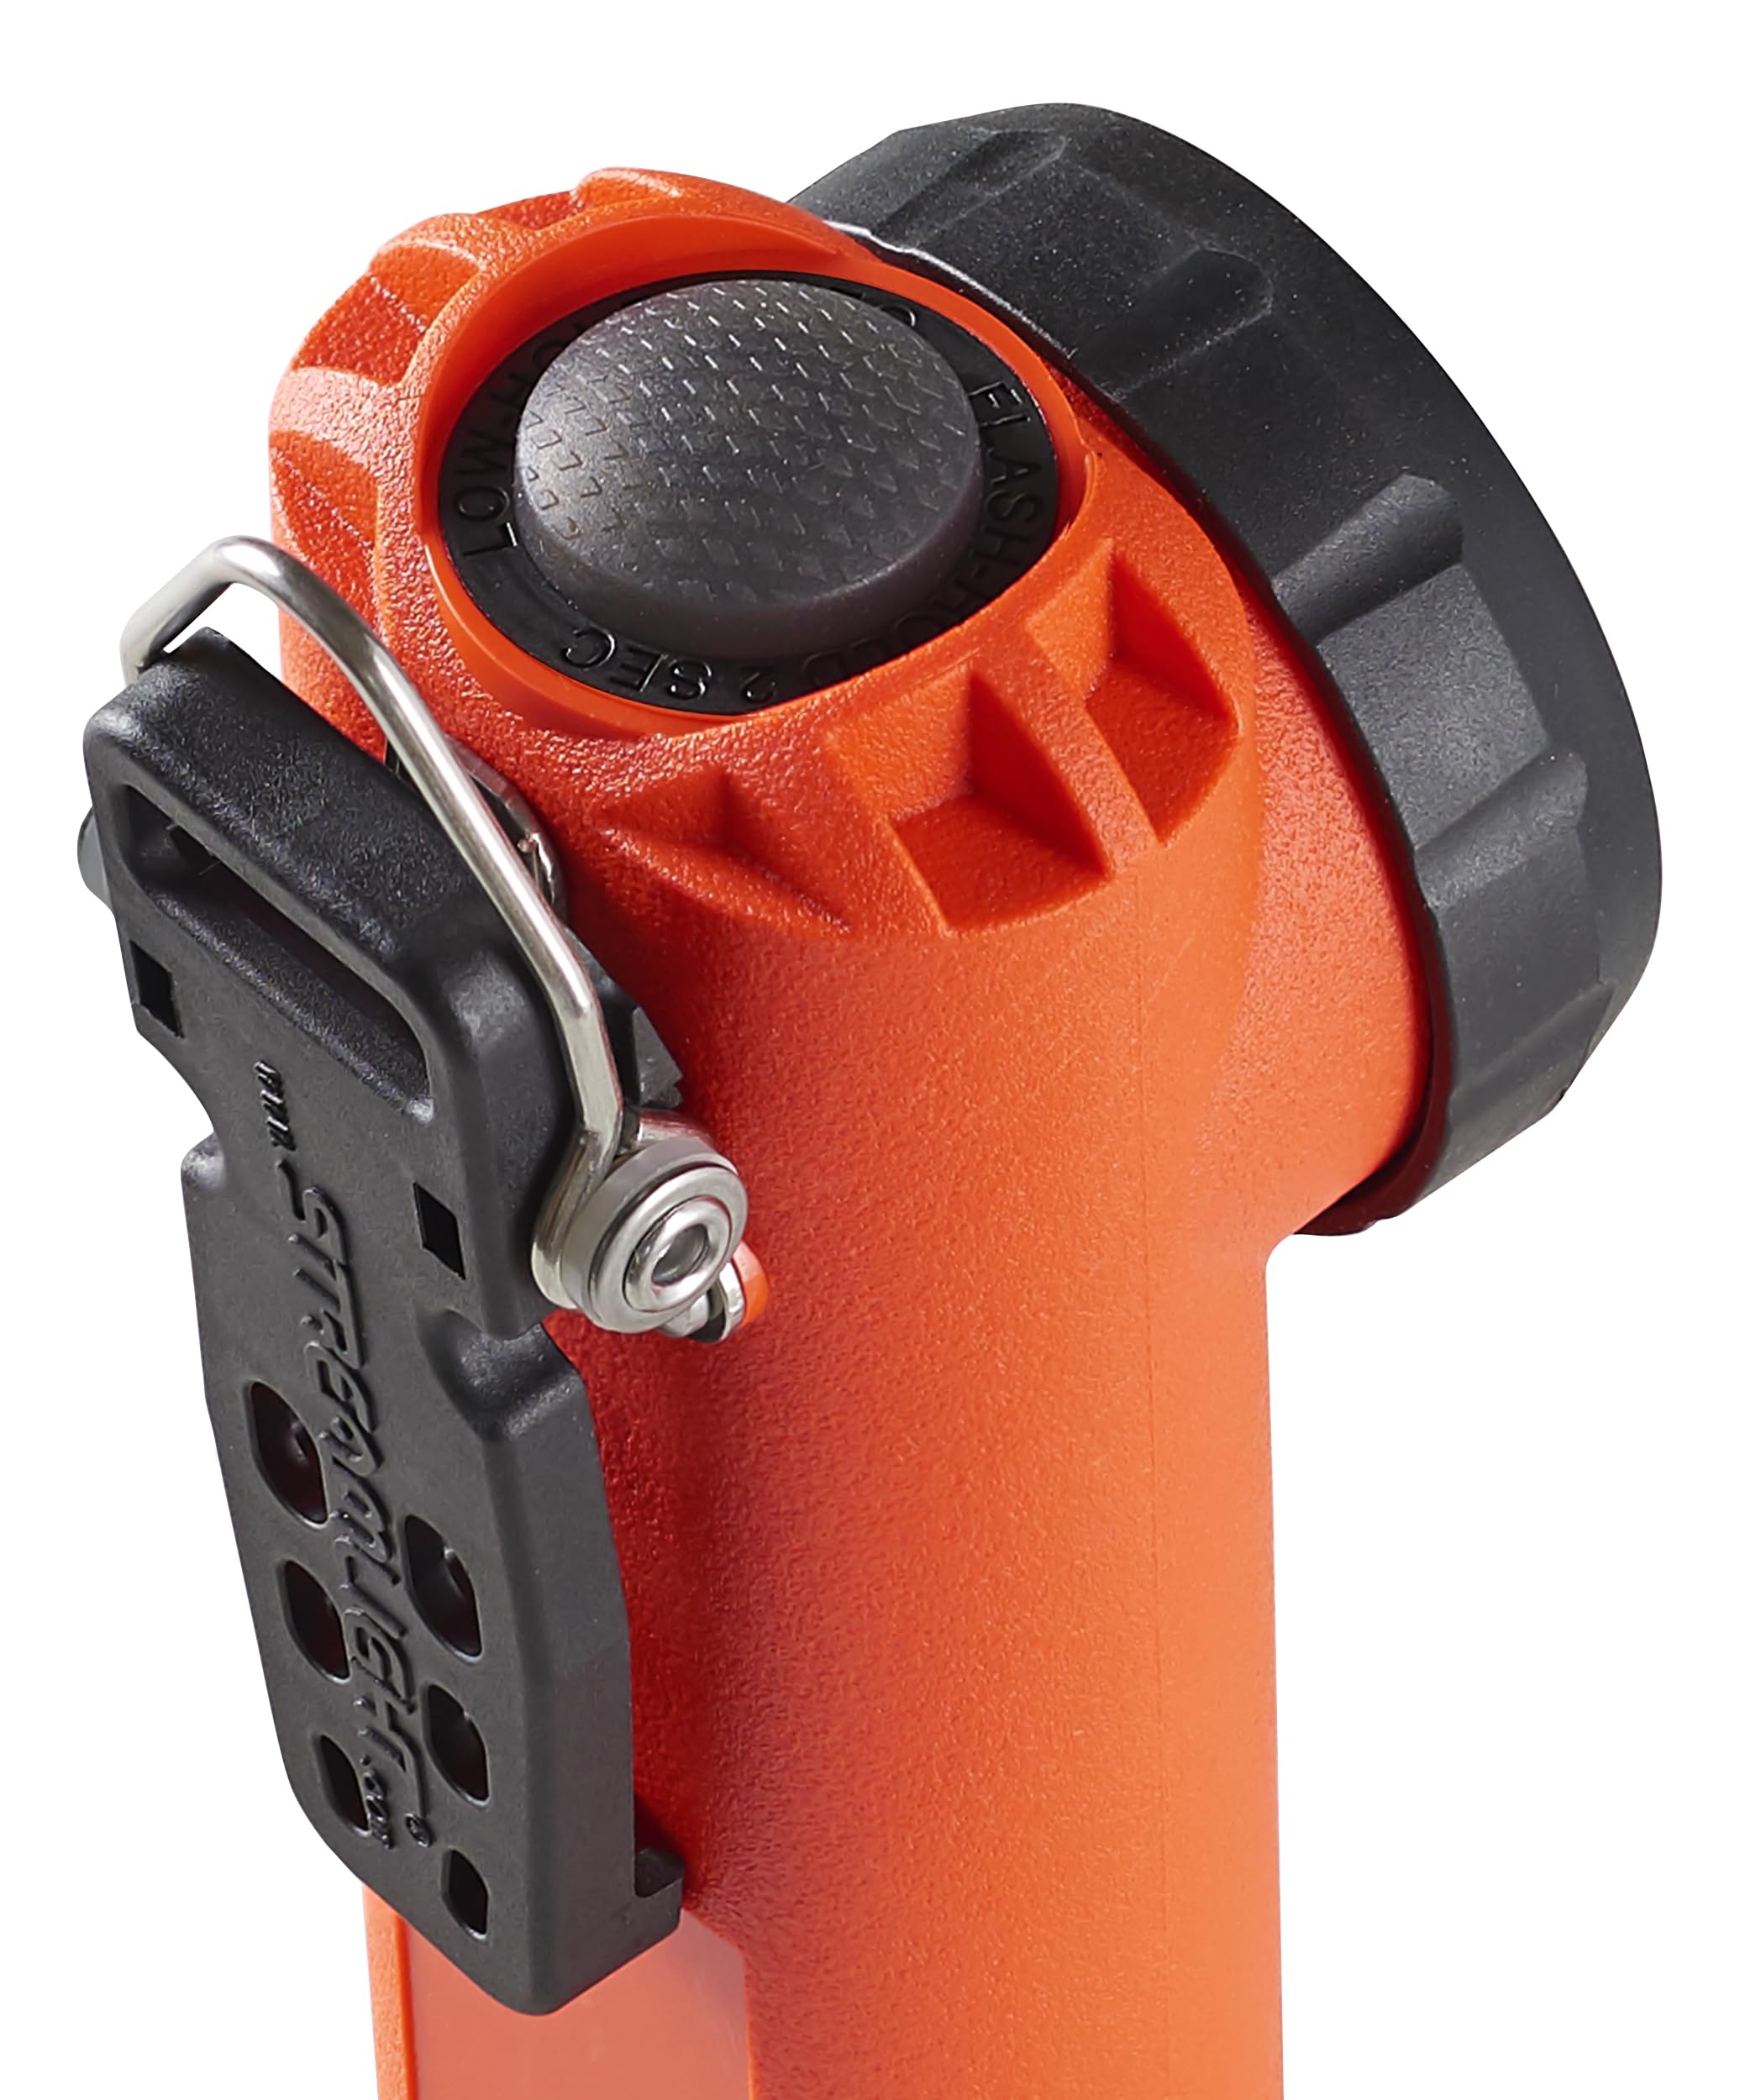 Streamlight 90950 Survivor X 250-Lumens C1D1 Safety-Rated Right-Angle Flashlight, Includes Alkaline Batteries and Holder, Orange